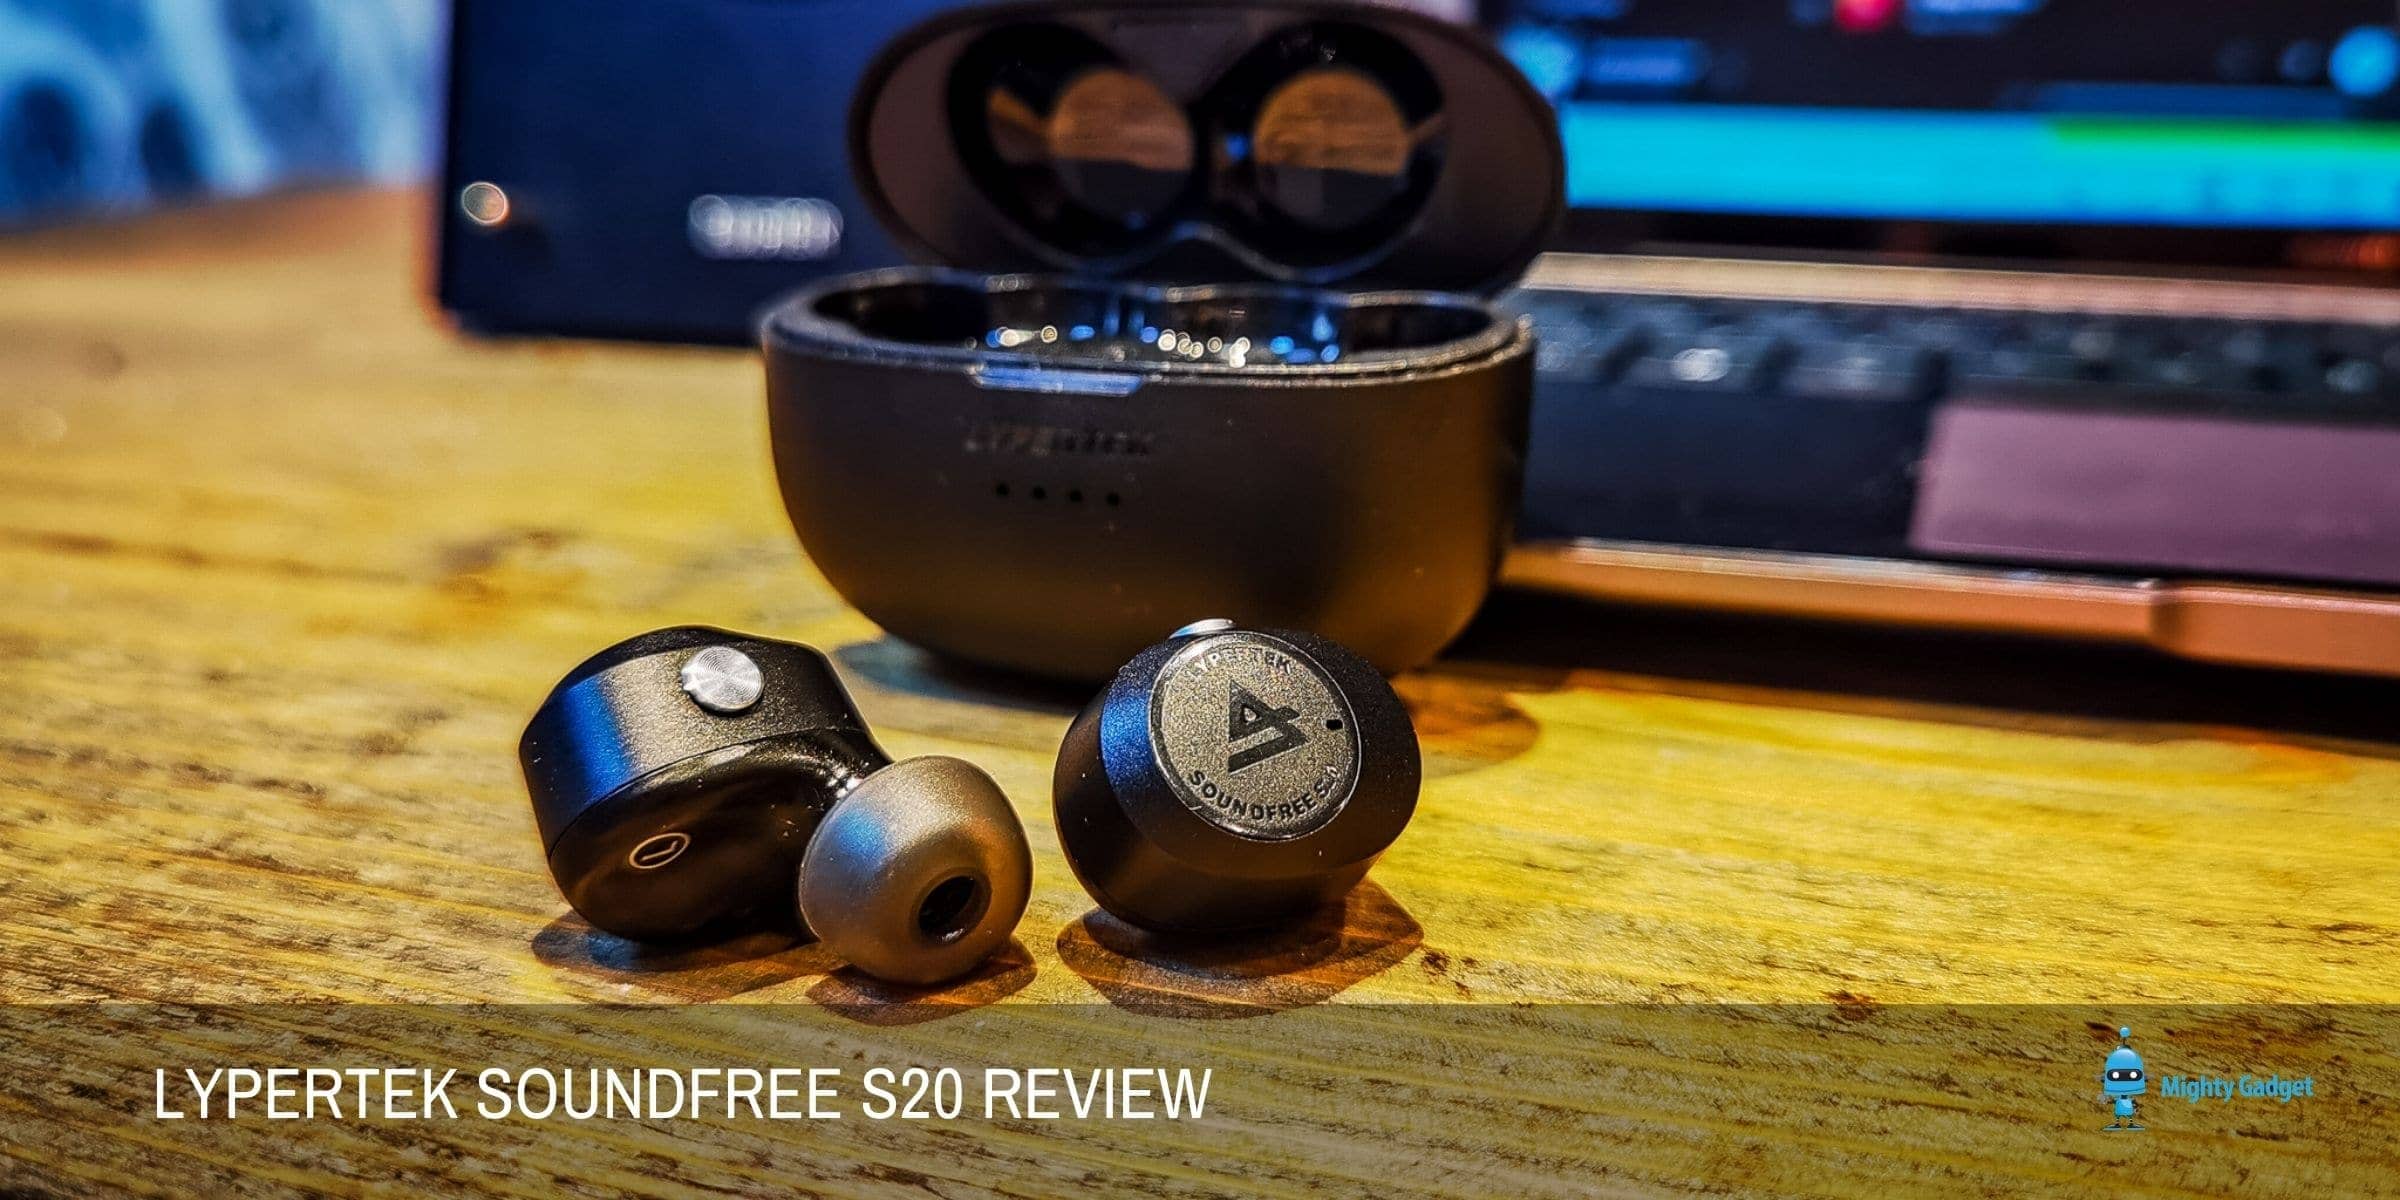 Lypertek Soundfree S20 Review – Superb TWS earbuds for under £70 but the TEVI are not much more